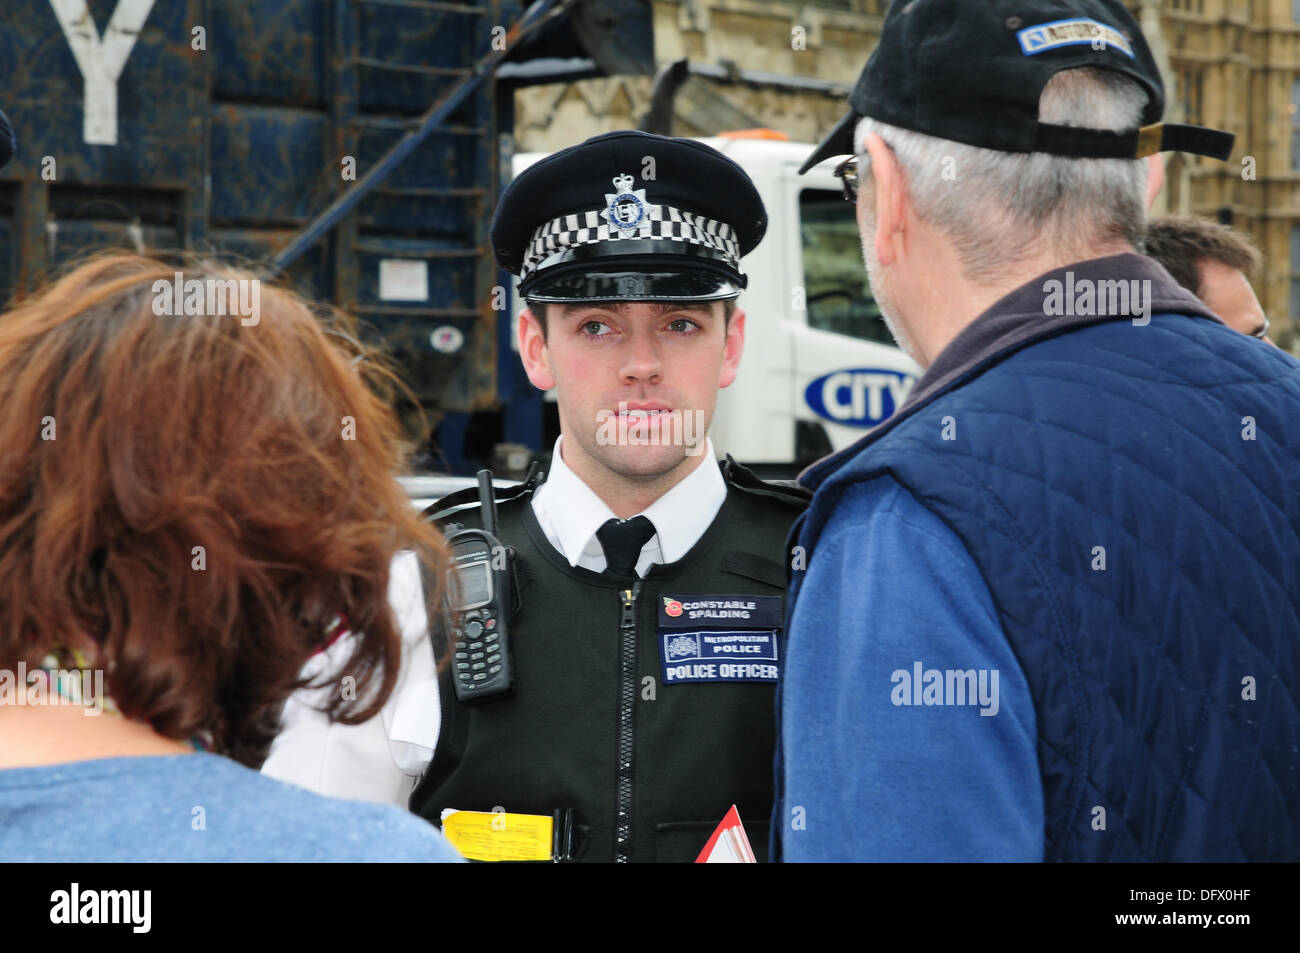 London UK, 9th oct 2013 : Abort67 is a Public Education project that seeks to change the way people think about abortion. The group protested outside Westminster. See Li / Alamy, Live News Stock Photo